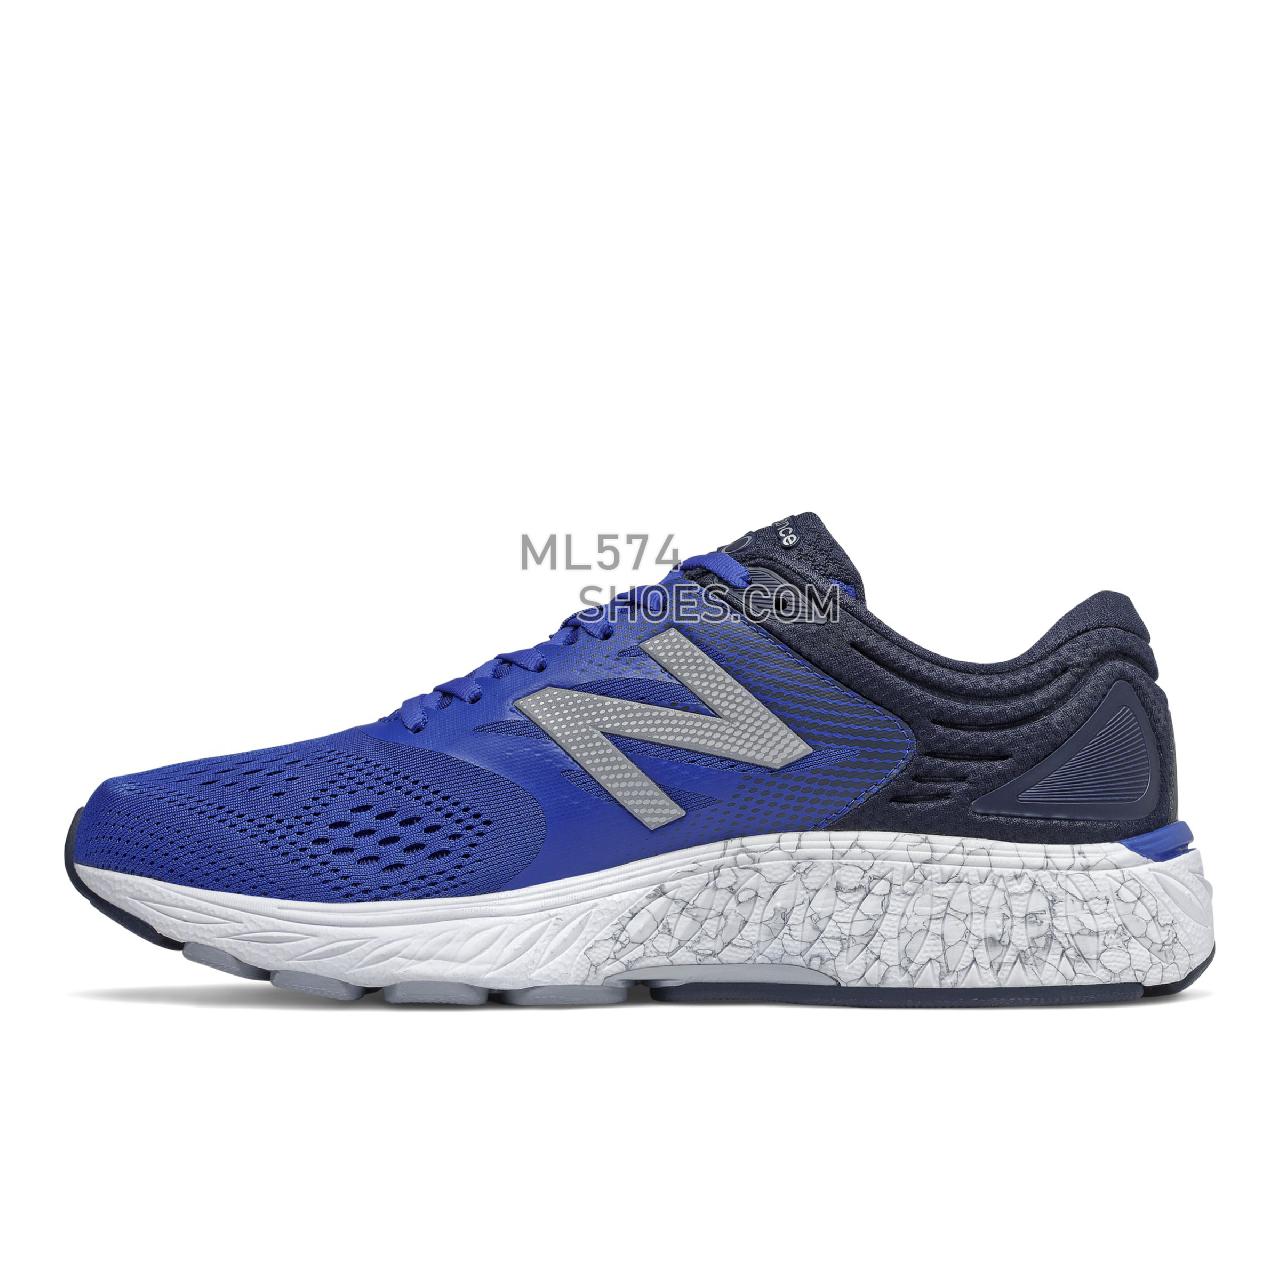 New Balance 940v4 - Men's Stability Running - Team Royal with Eclipse and White - M940CR4